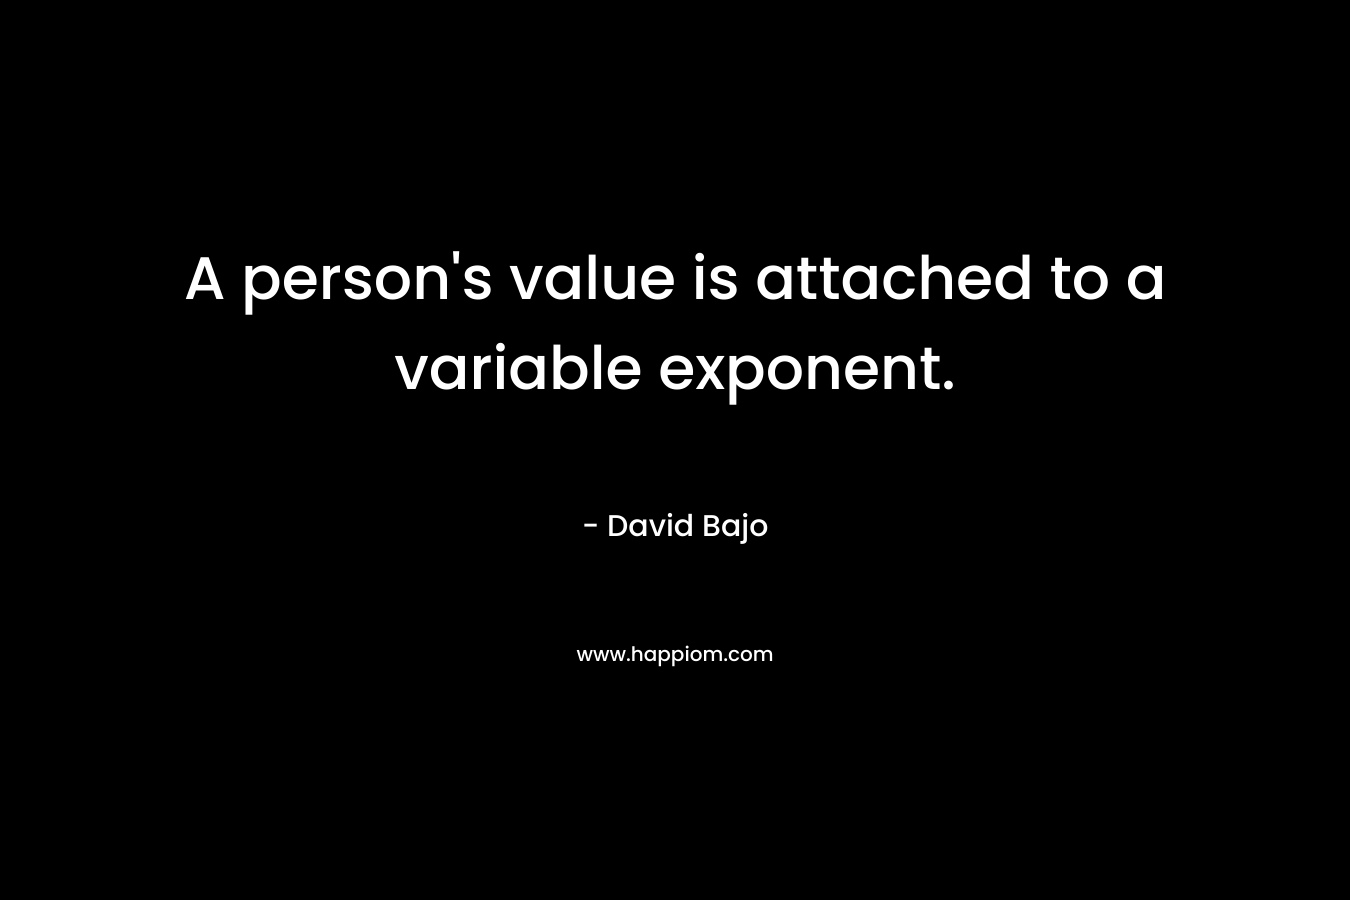 A person’s value is attached to a variable exponent. – David Bajo